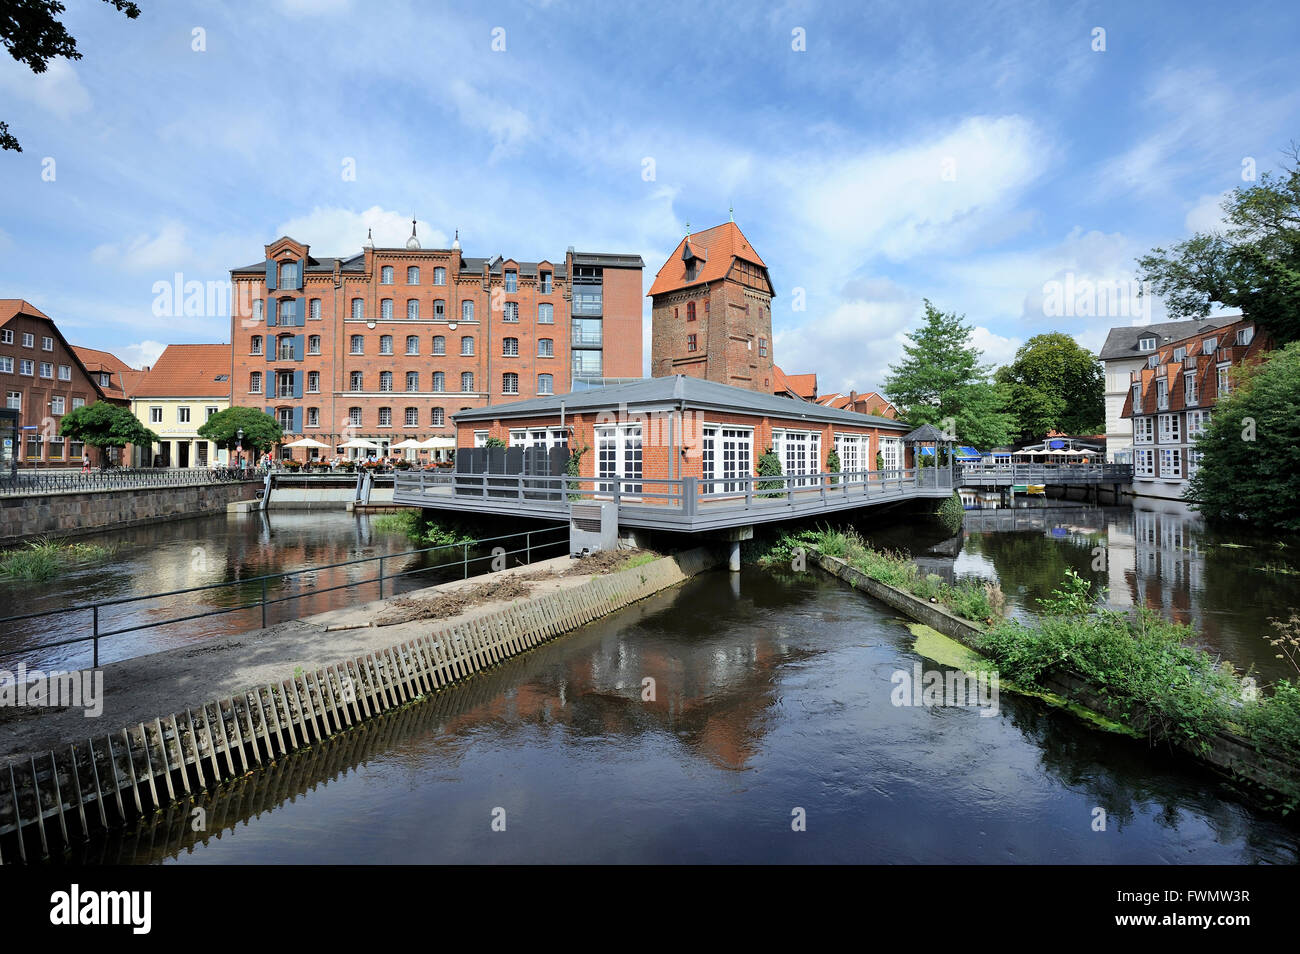 Abtsmuhle, Hanseatic Town Luneburg, Germany Stock Photo